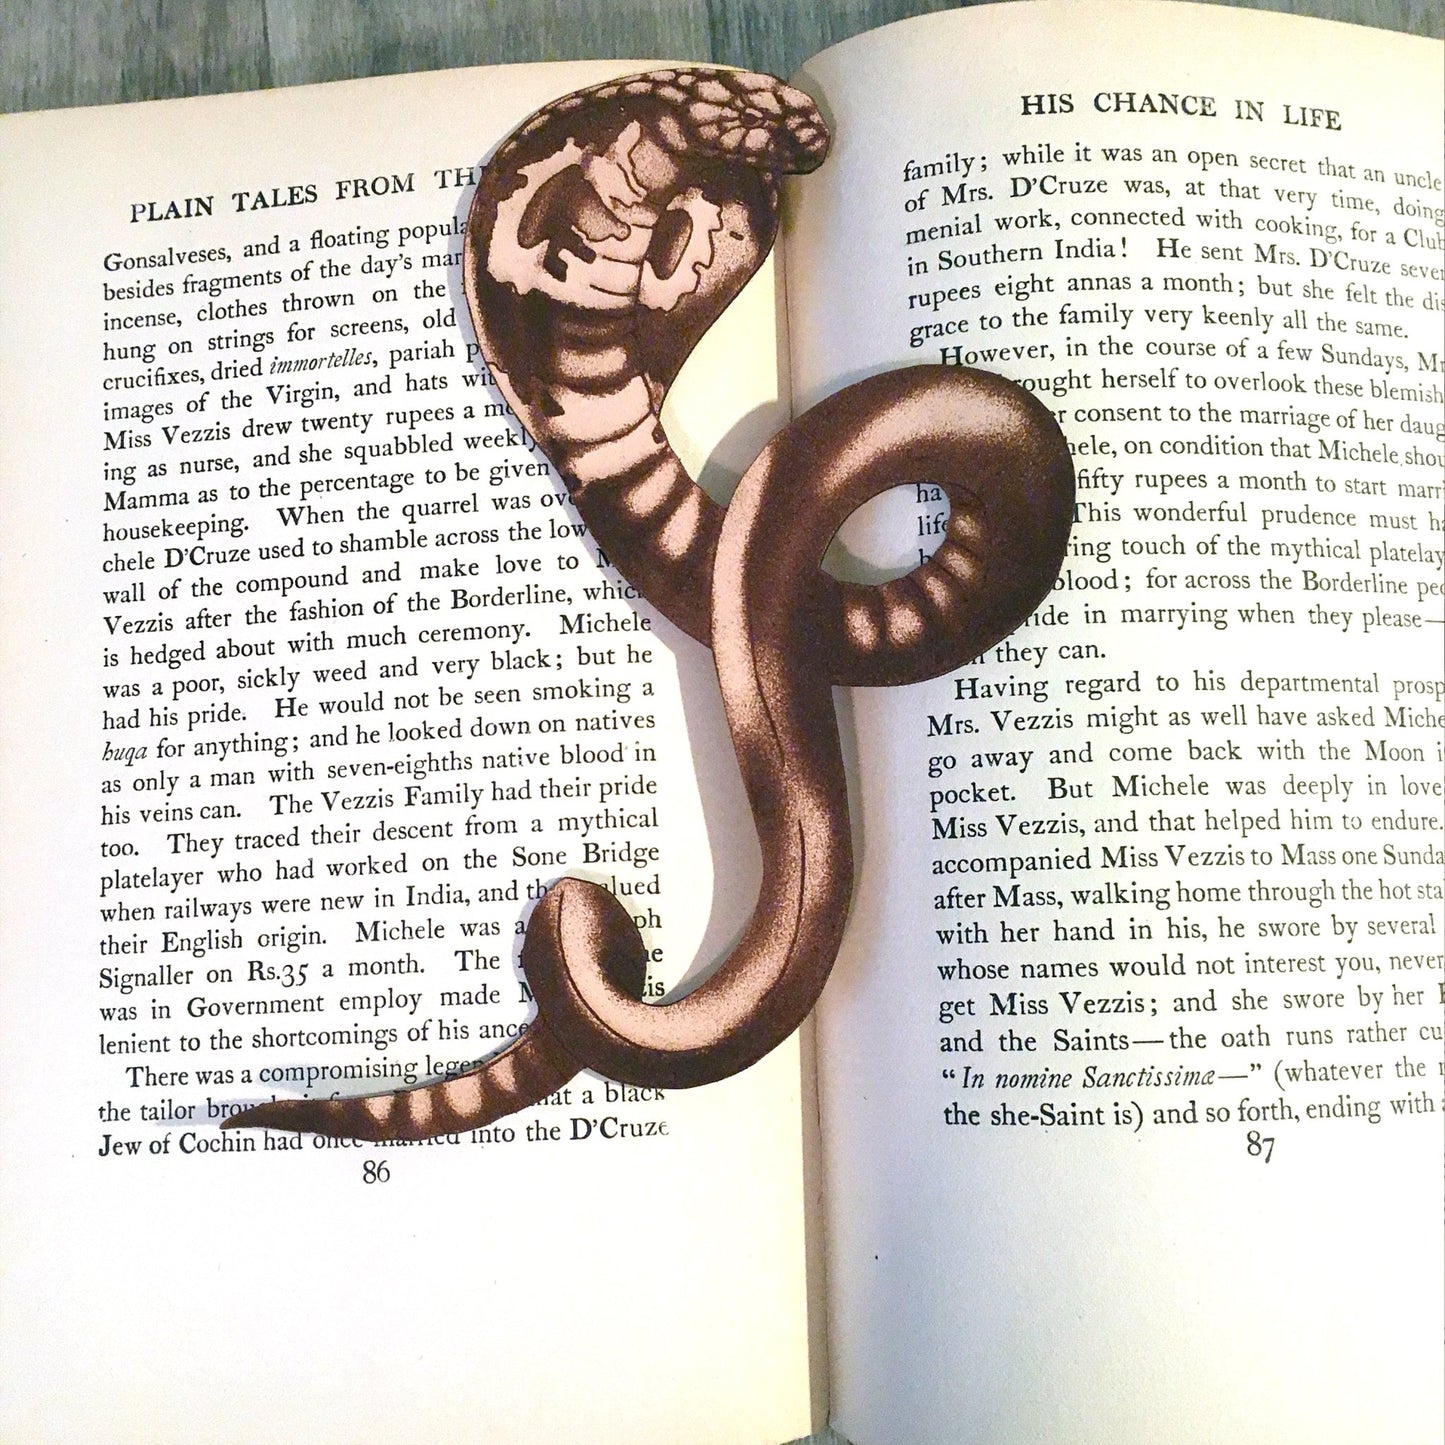 Snake shaped bookmark resting on a book